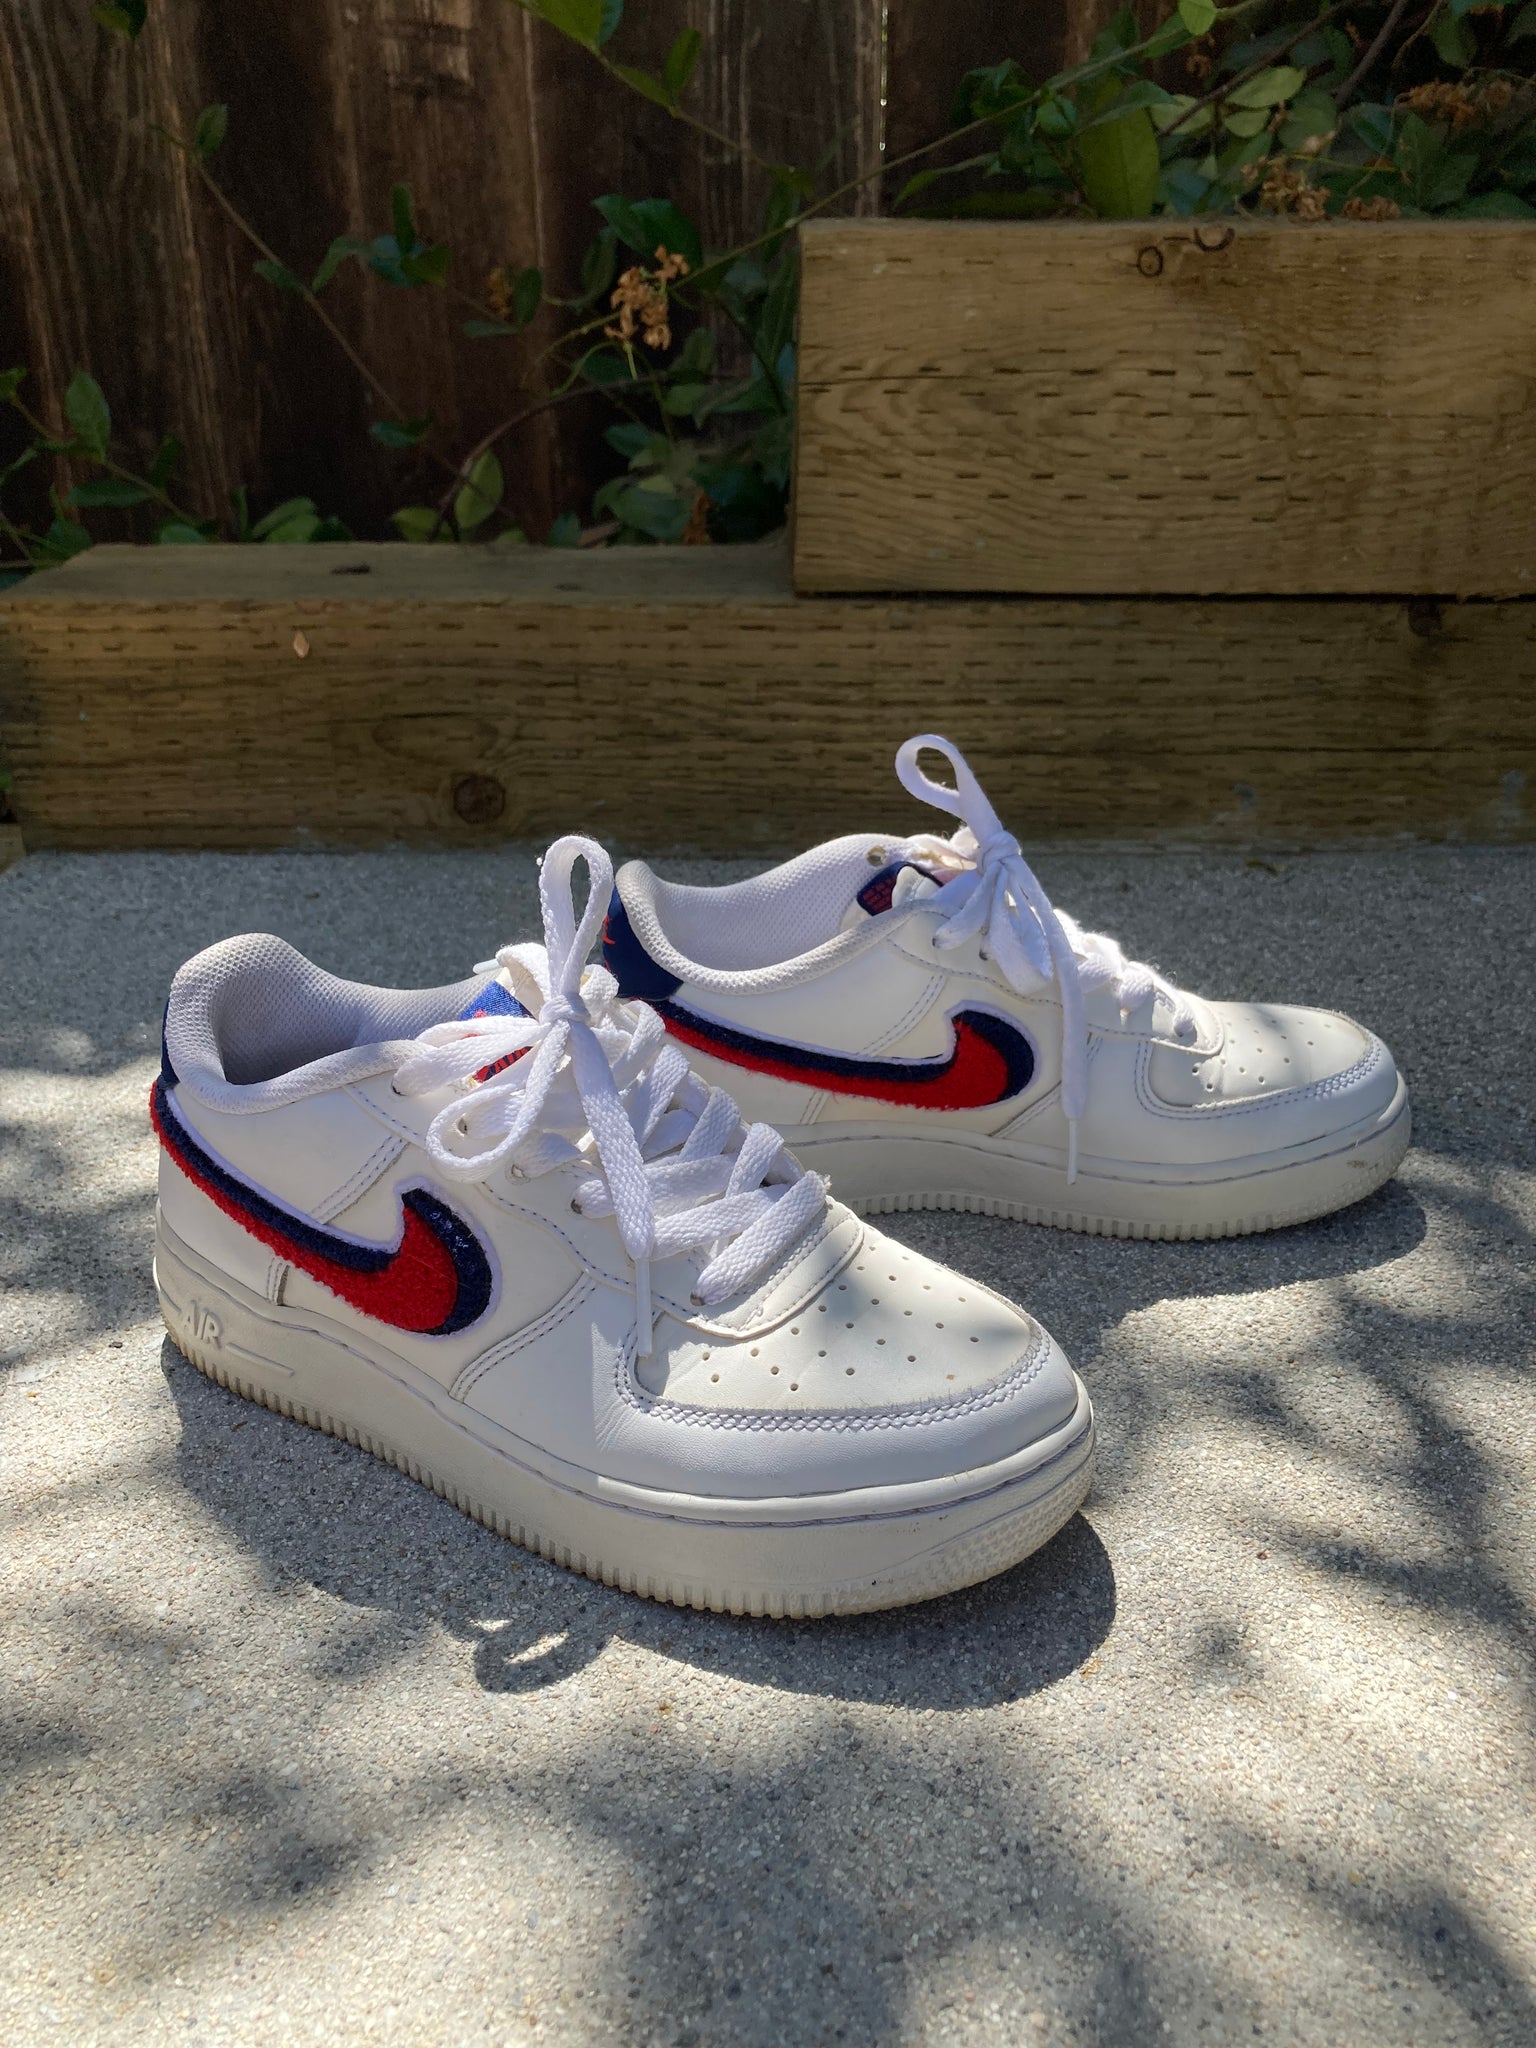 White Nike Air 1 with Red and "Chenille Swoosh" size 6.5 Wo – The Curatorial Dept.